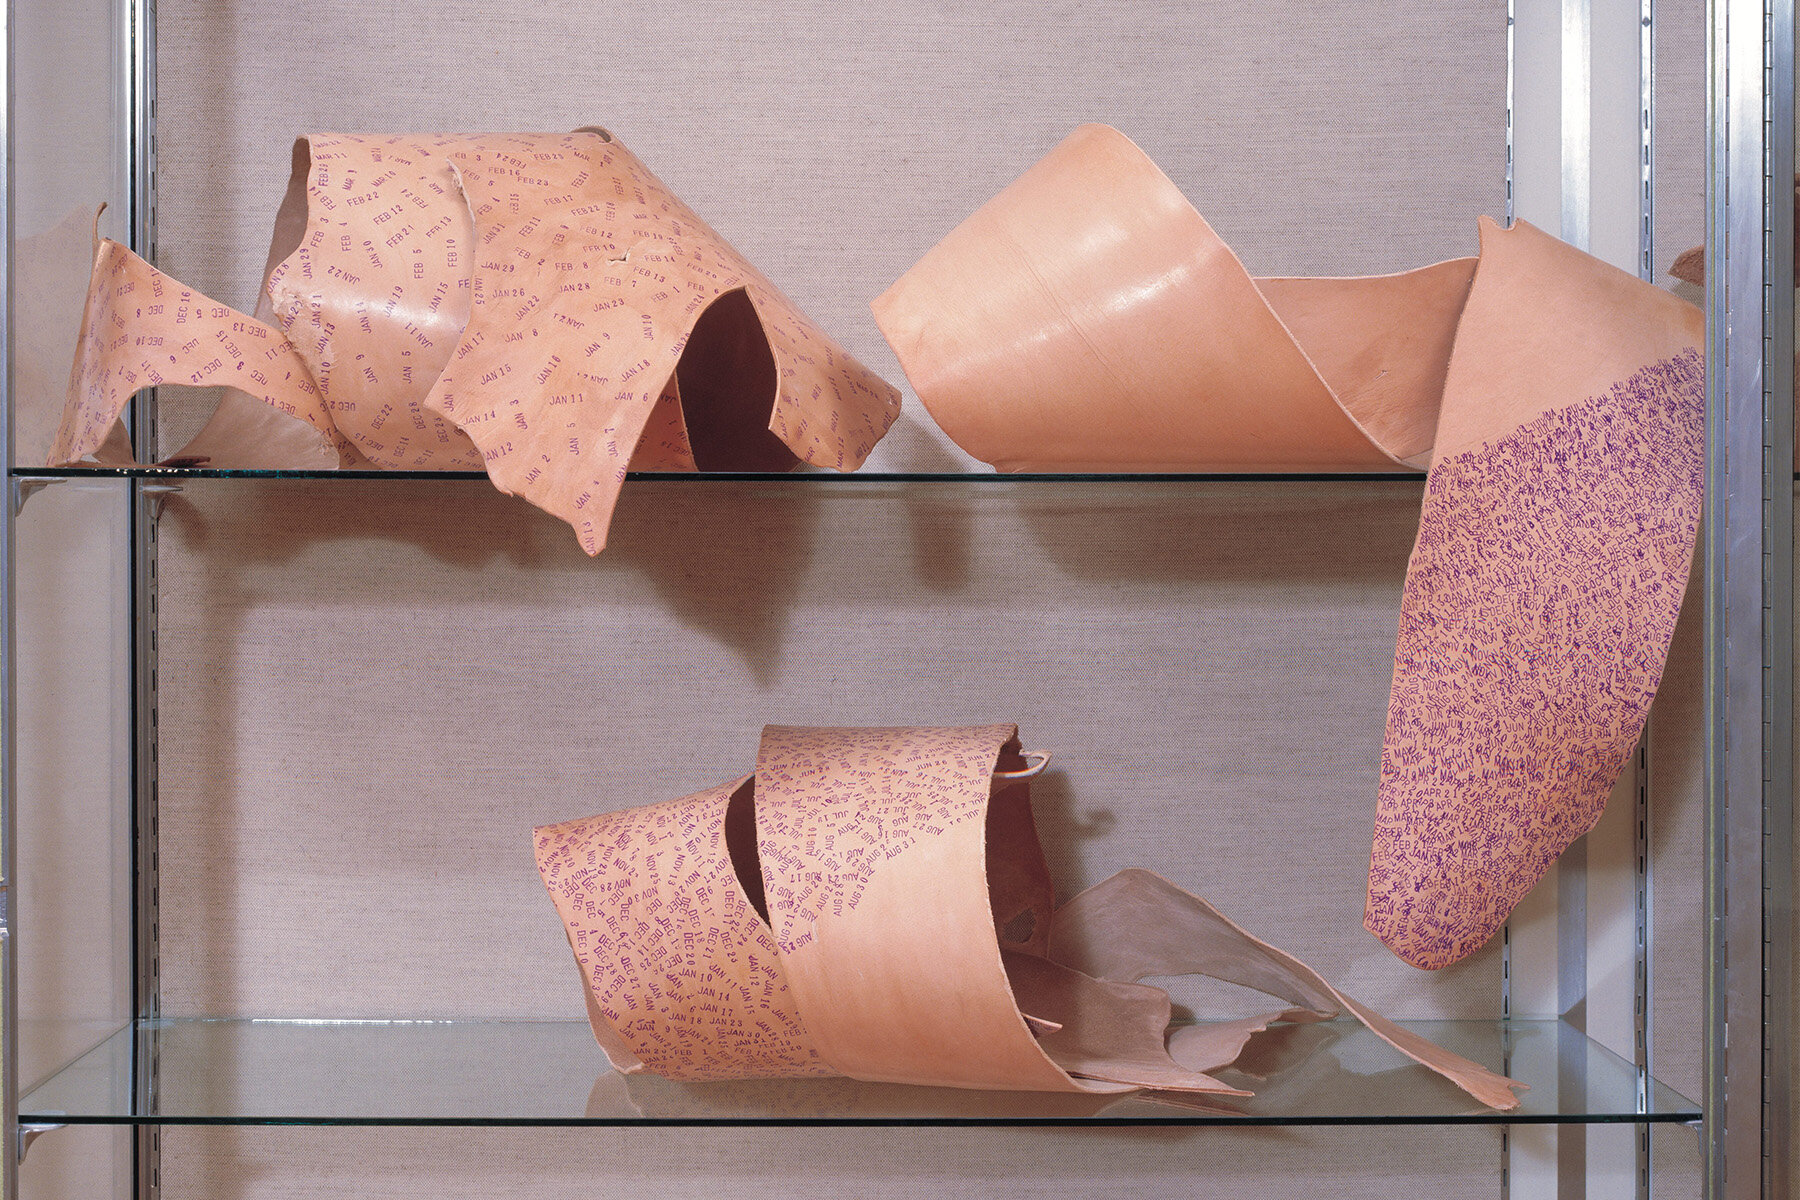   Anne Frank Project: Conditions for Growth , installation details, Tufts University Art Gallery, 1994. Photo: B. T. Martin 